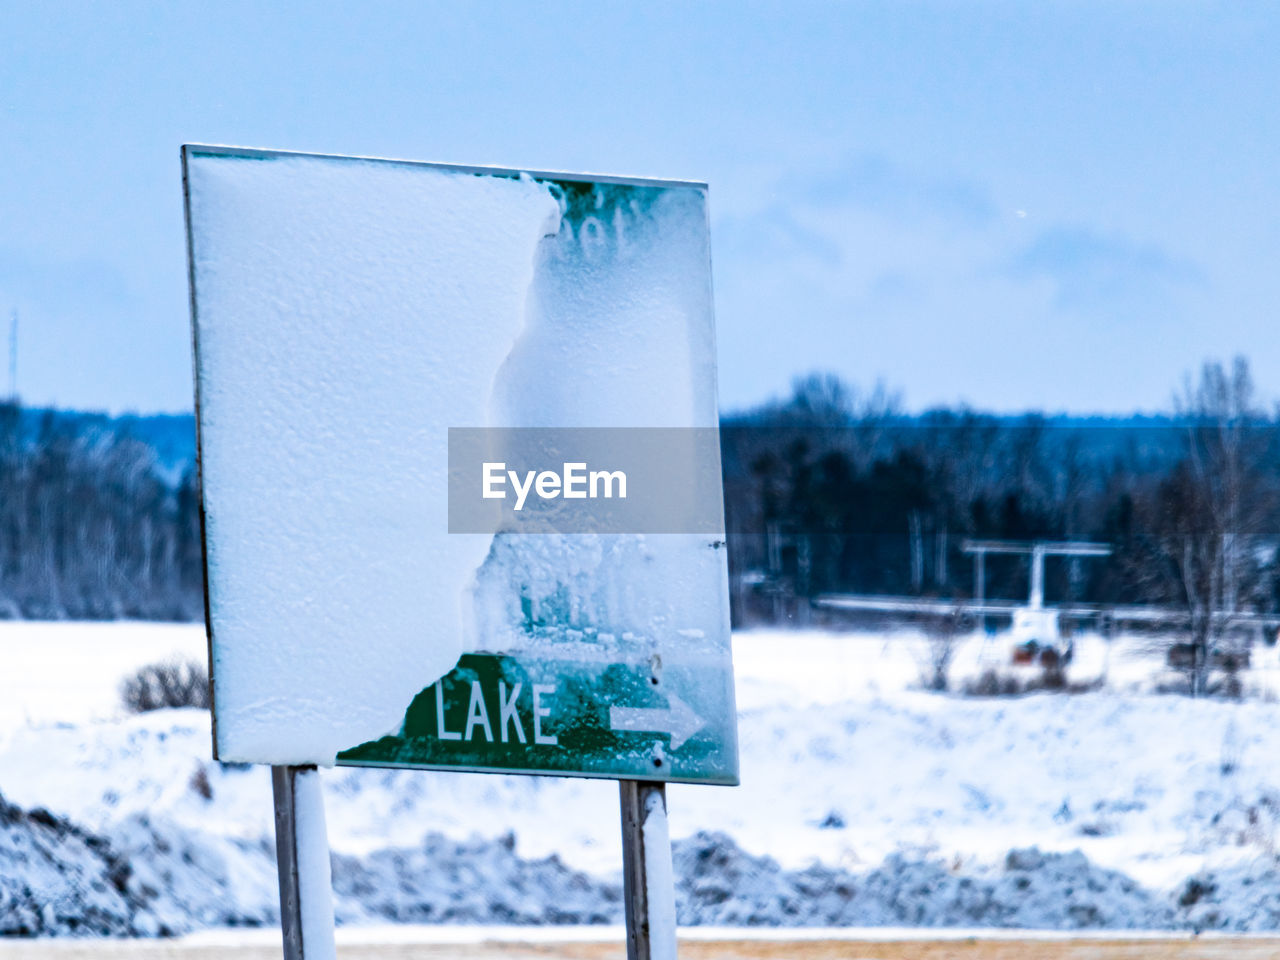 Highway exit sign points towards a lake, but its name is obscured by snow